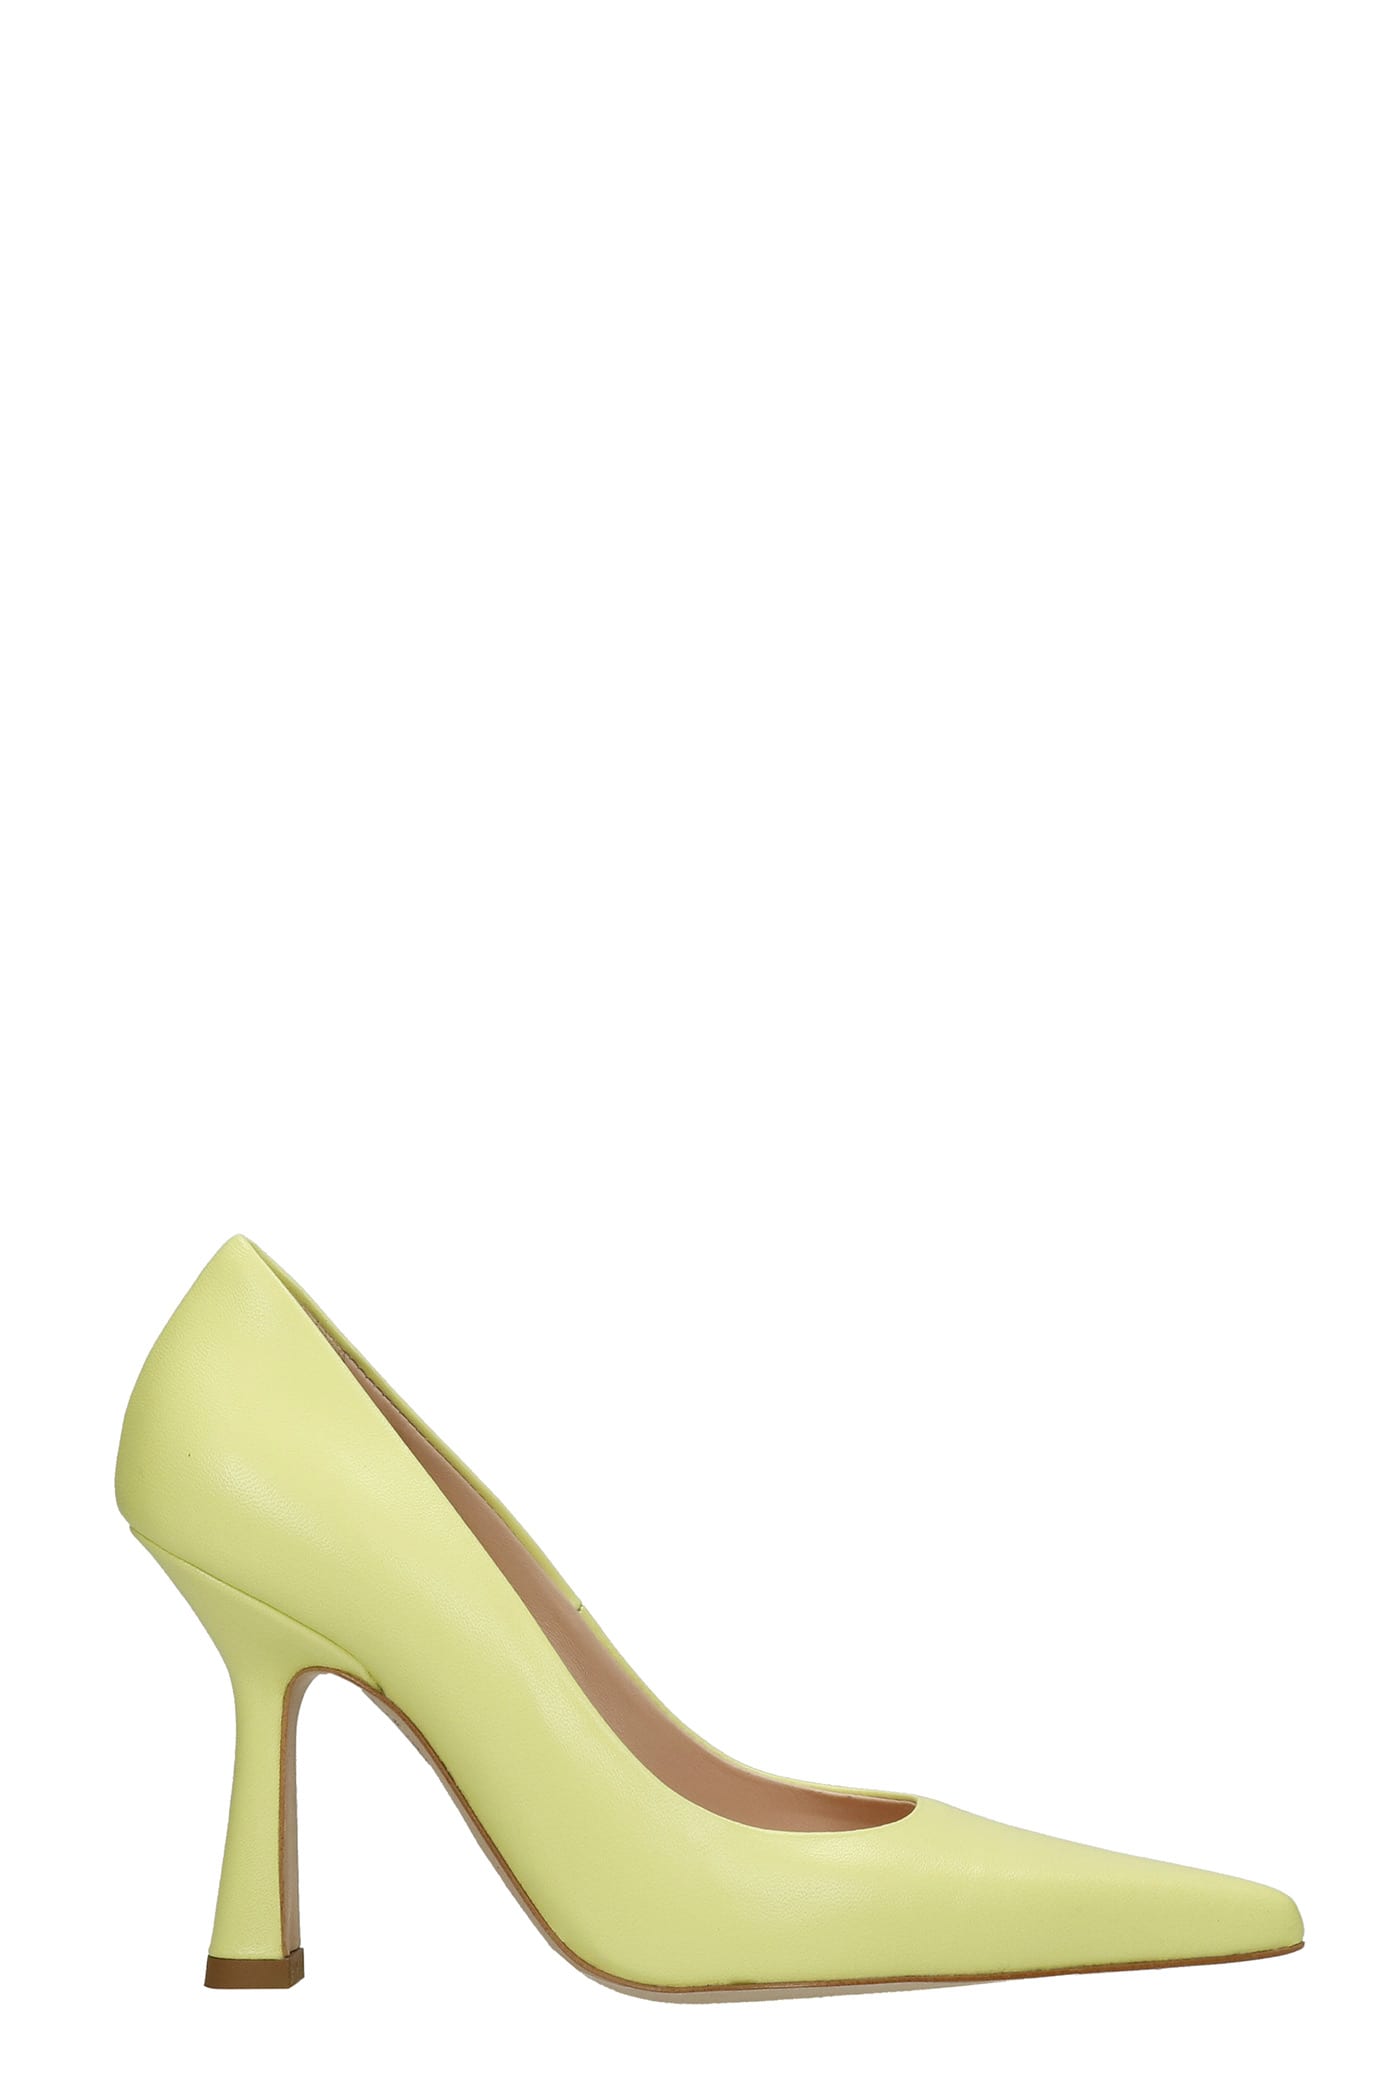 Liu-Jo Pointy Kh02 Pumps In Yellow Leather